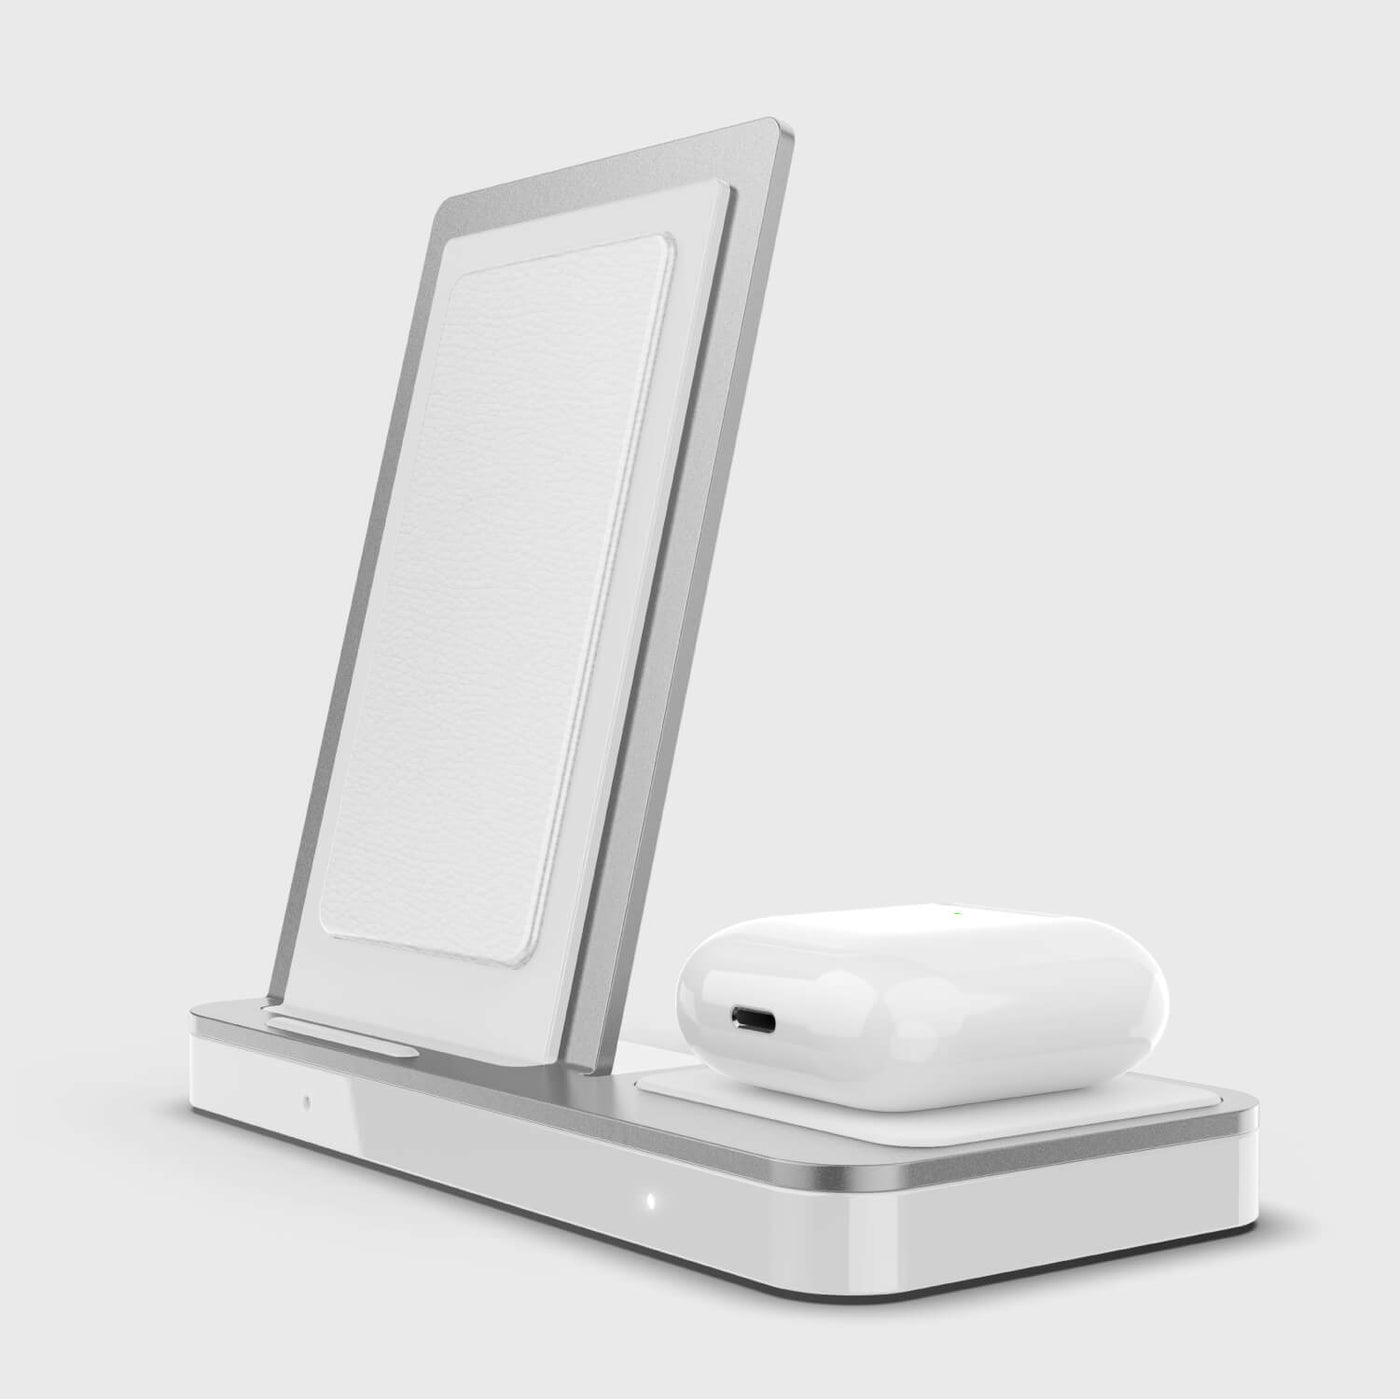 10W Wireless Qi Charger with 2 spots to recharge your iPhone and AirPods simultaneously. Raptic Duo in white.